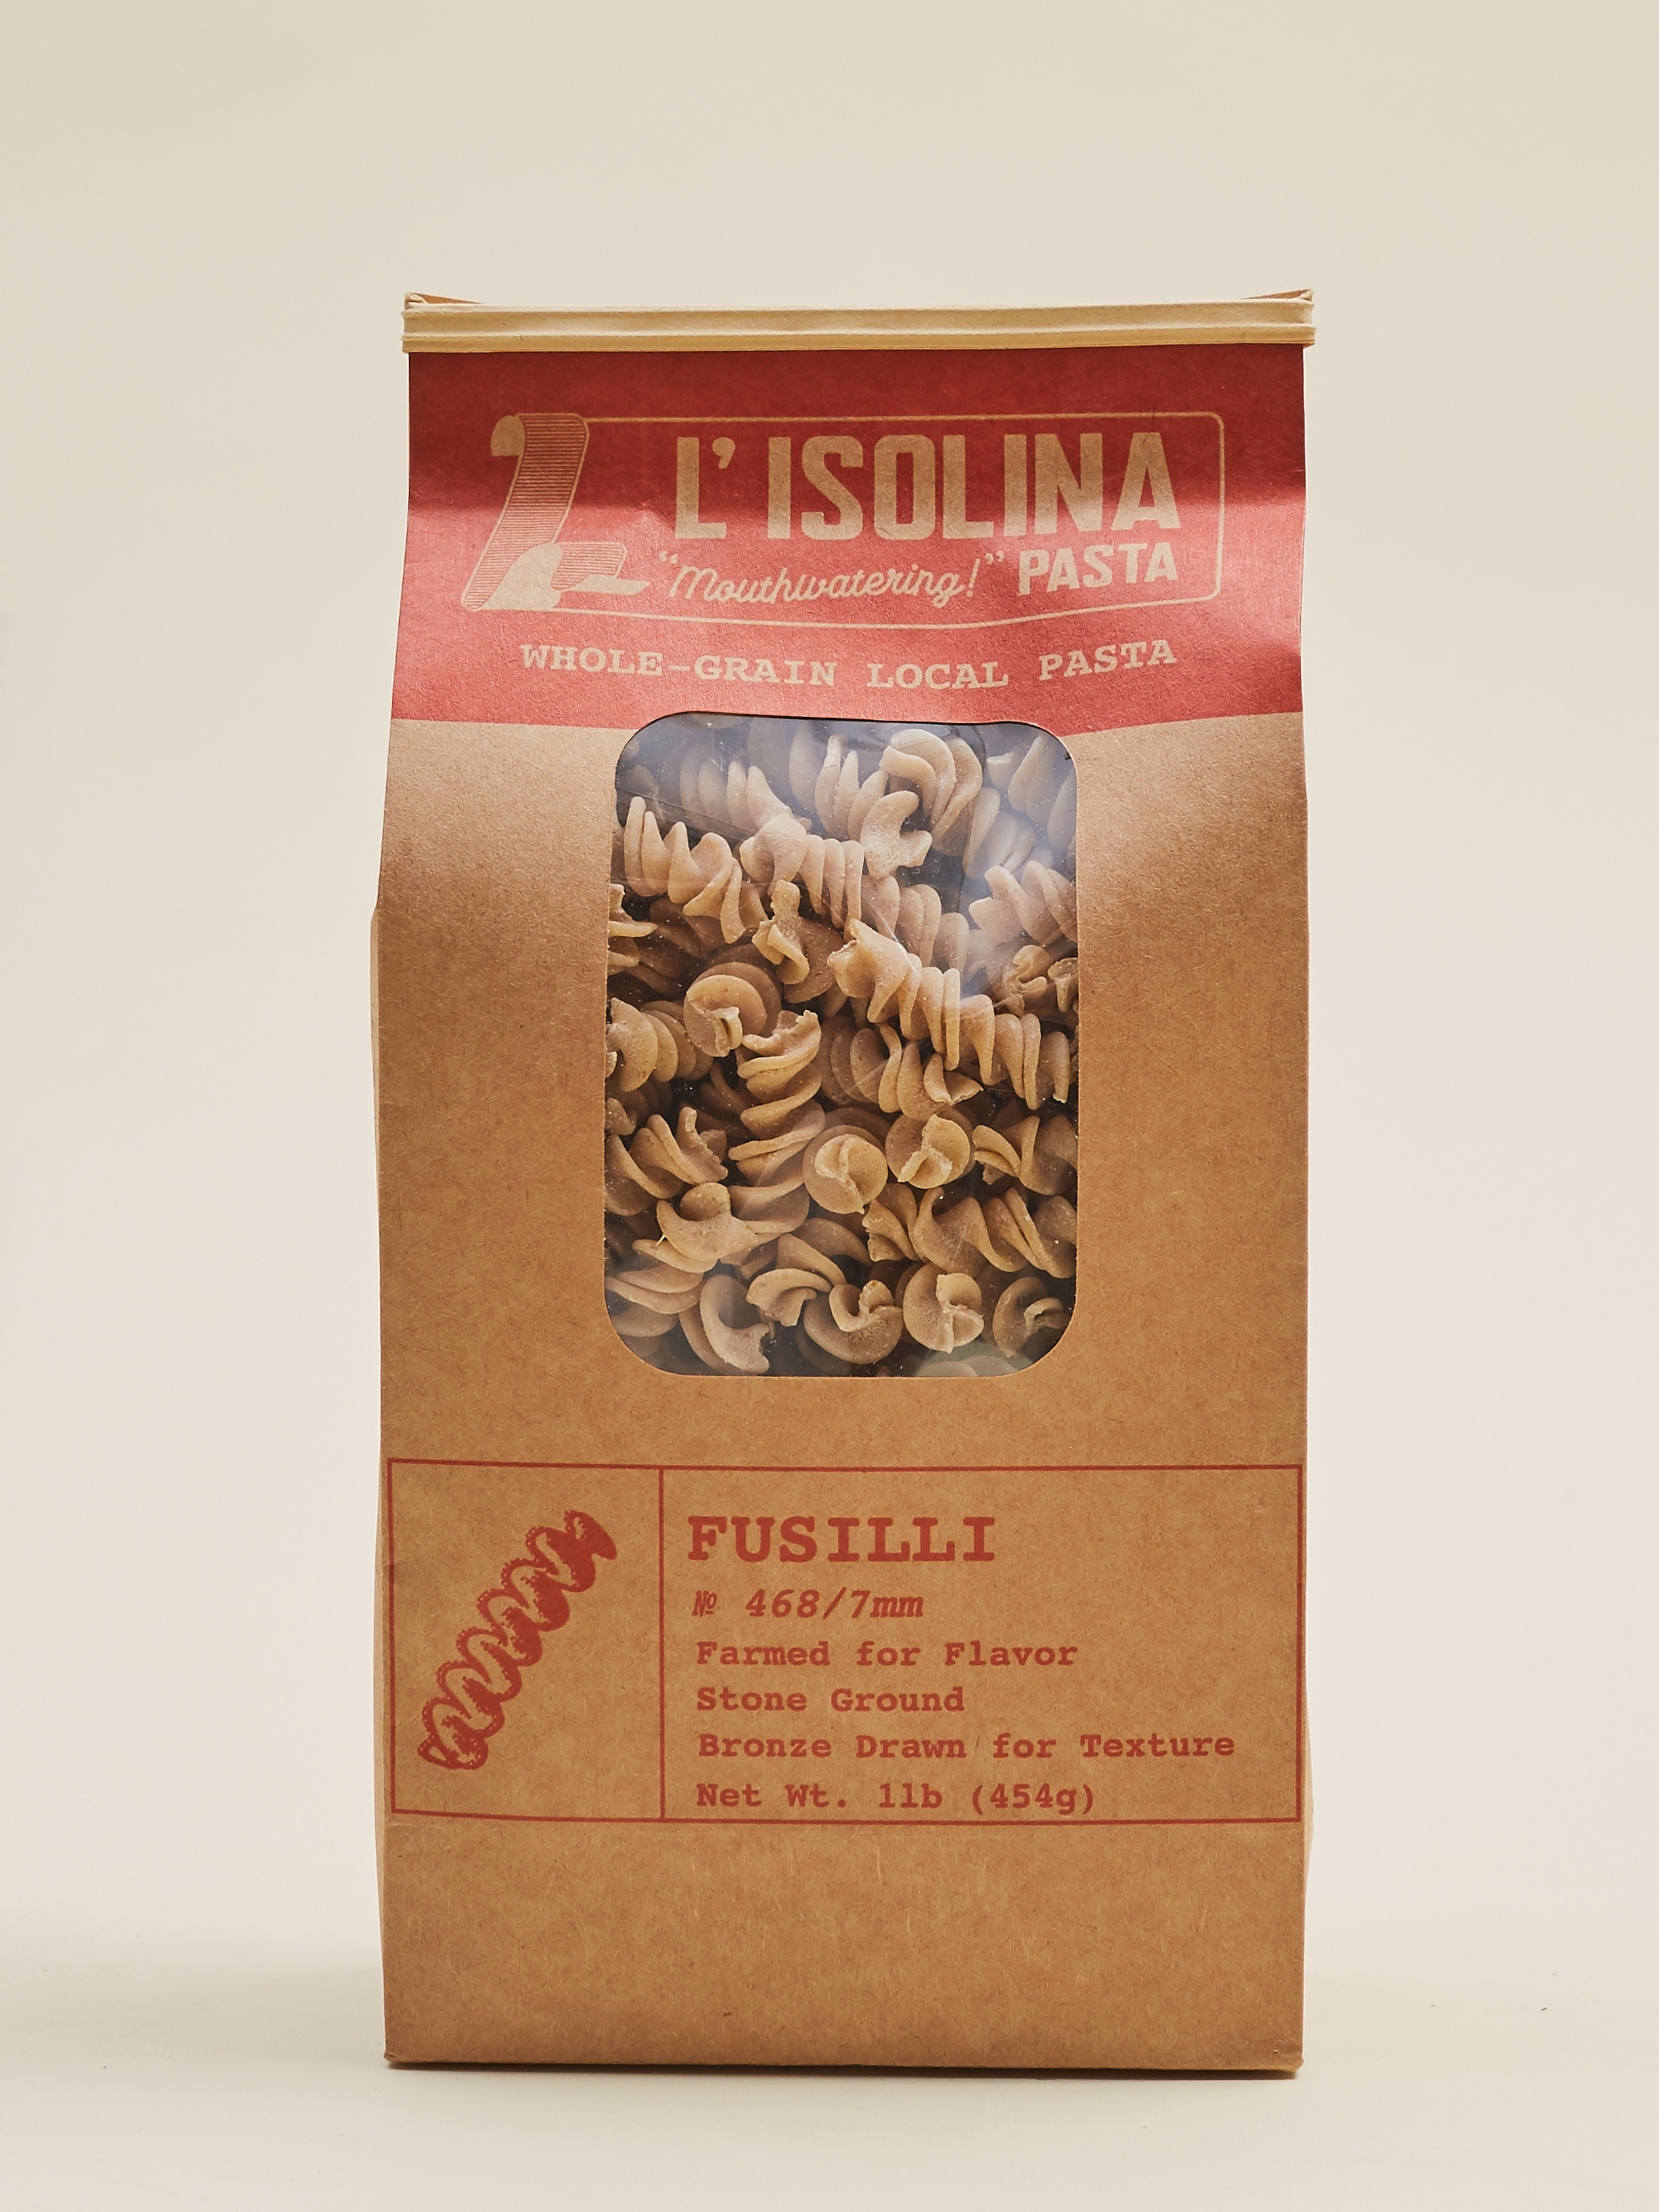 L'Isolina Variety 4-Pack